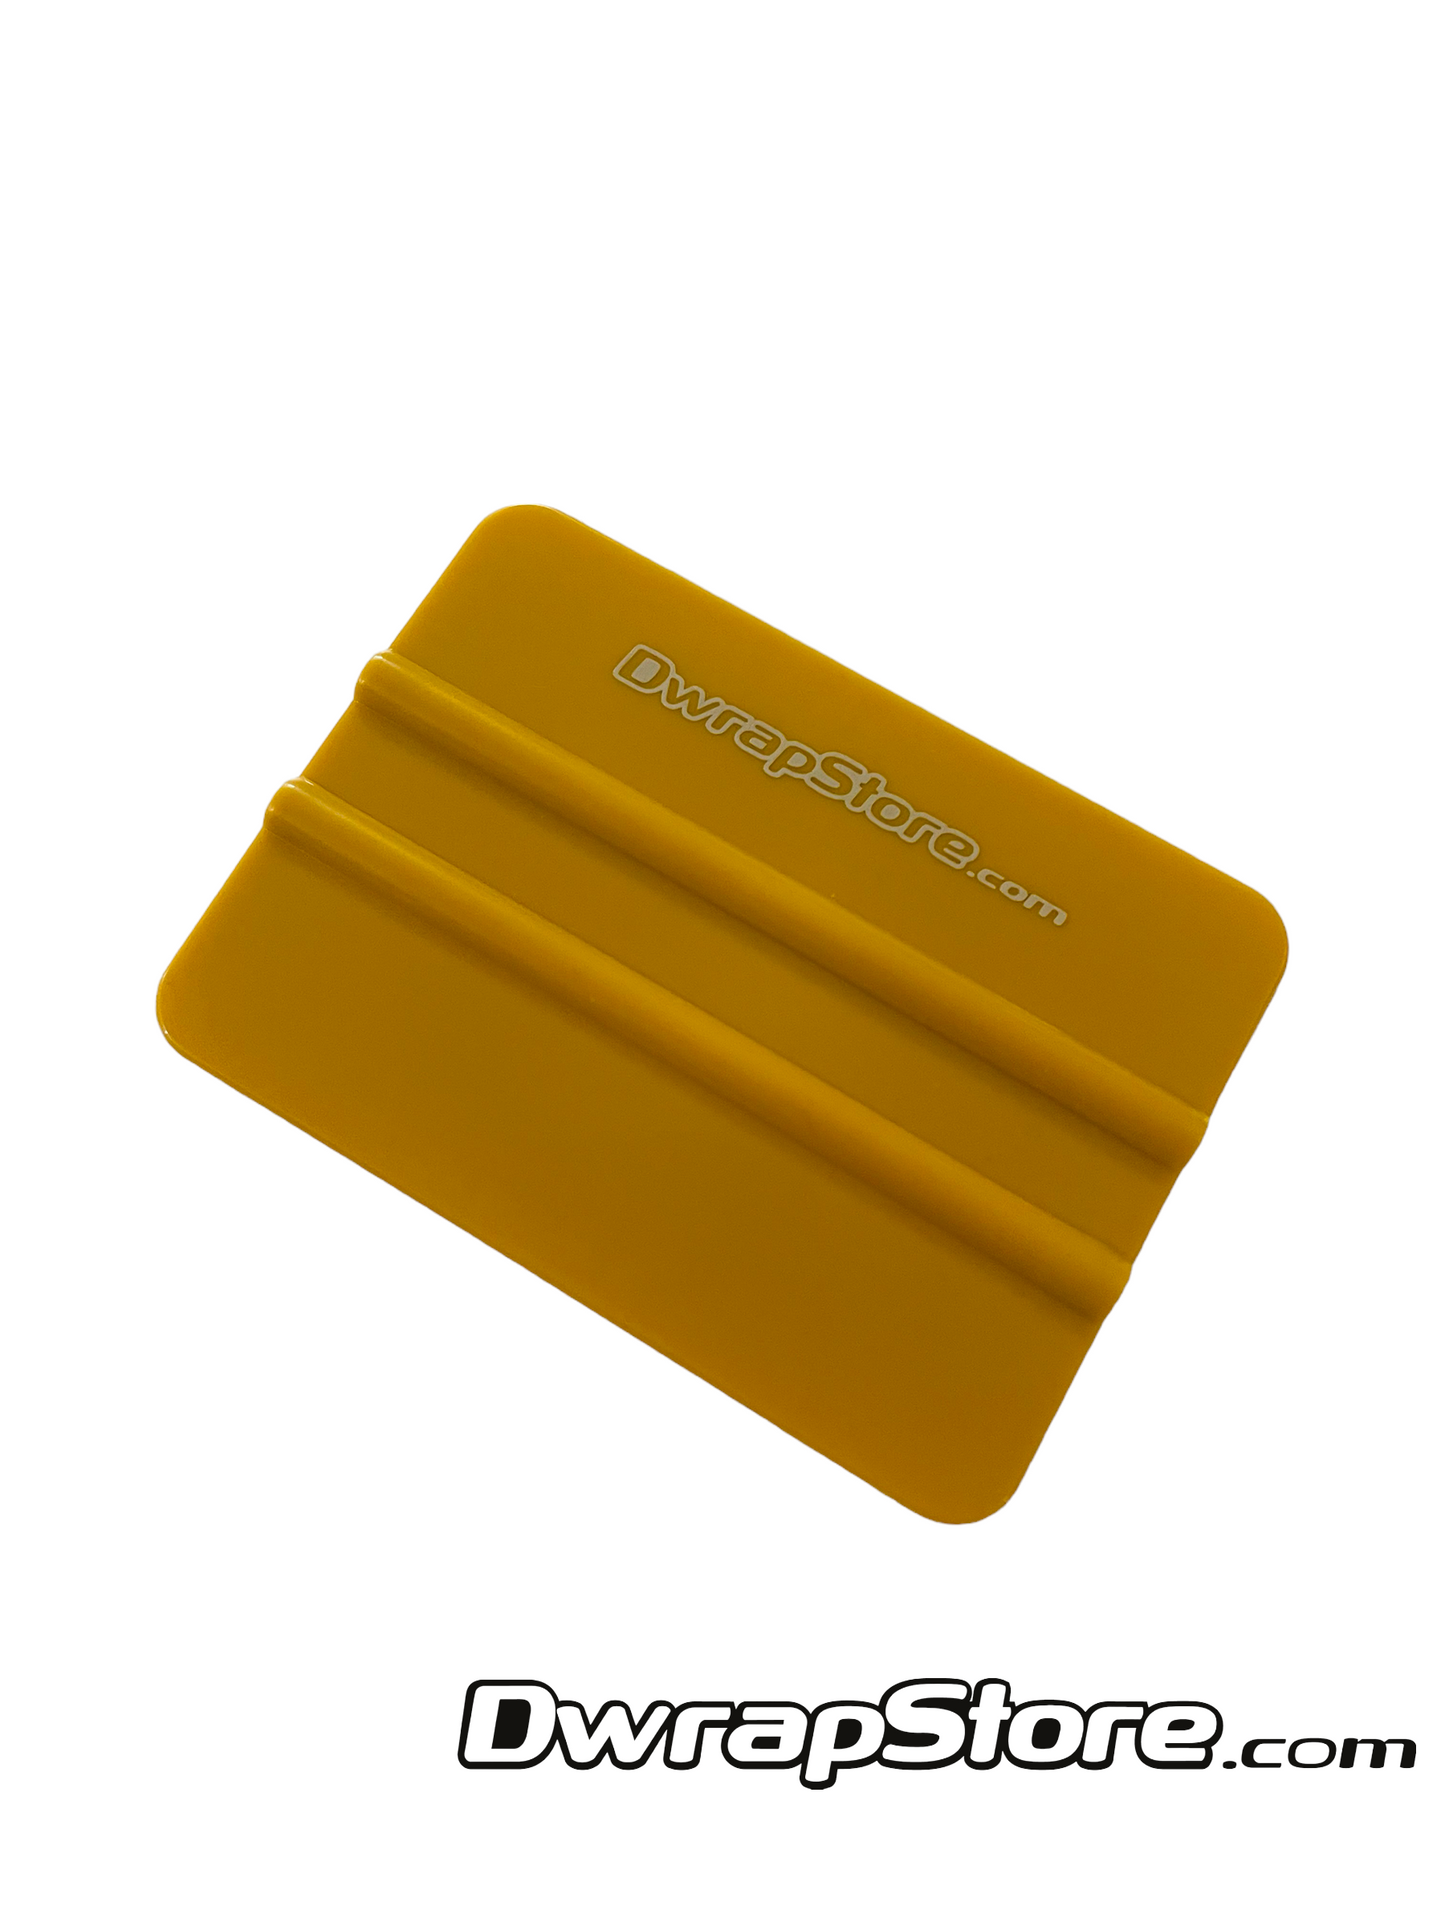 DwrapStore Soft Gold Squeegee without Felt